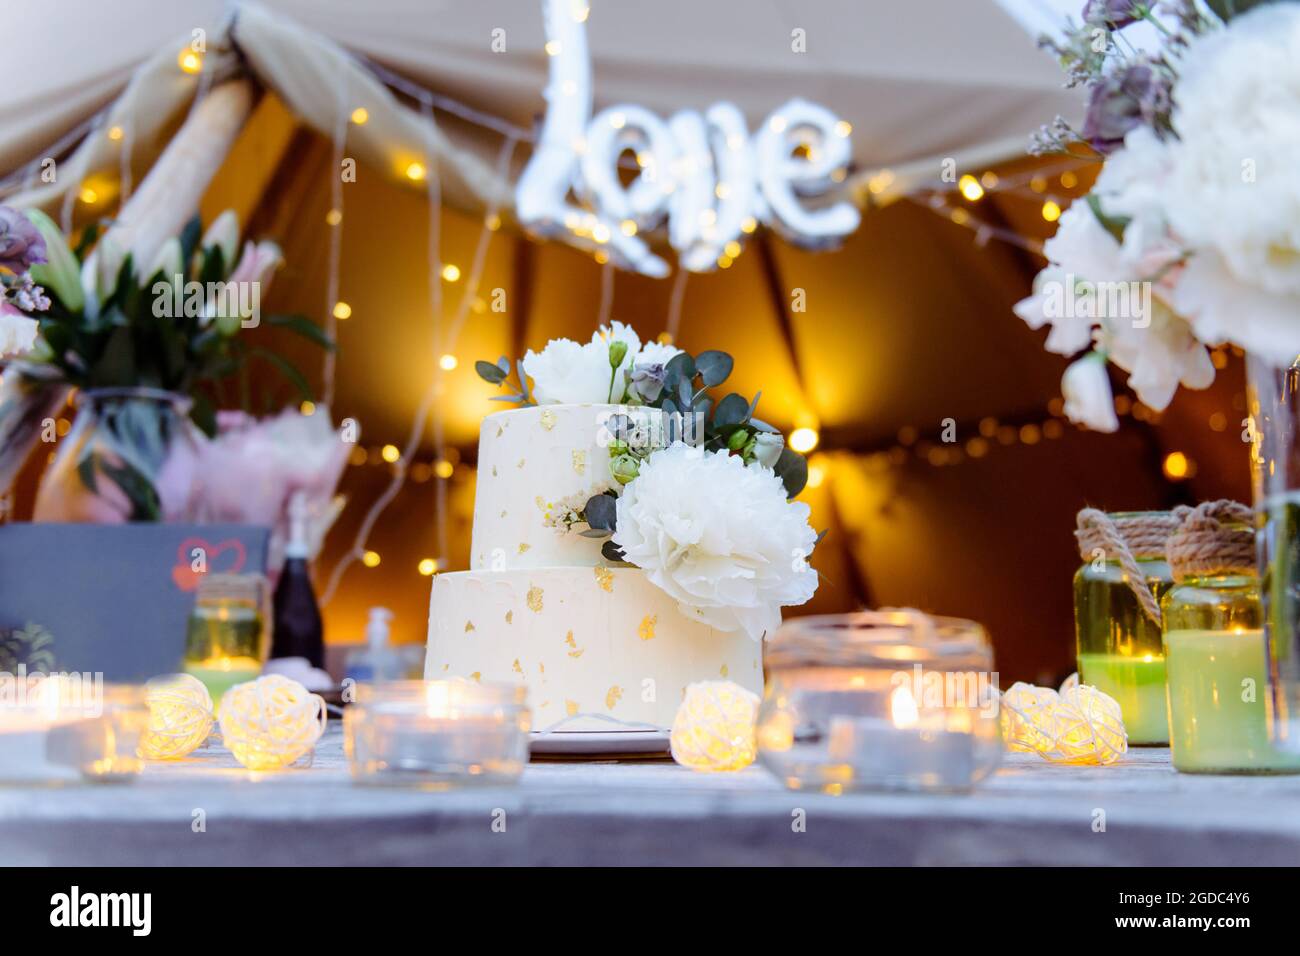 Two tiered wedding cake decorated with fresh peony flowers and edible gold on the wooden table with flowers, candles. Outdoor wedding with lights Stock Photo